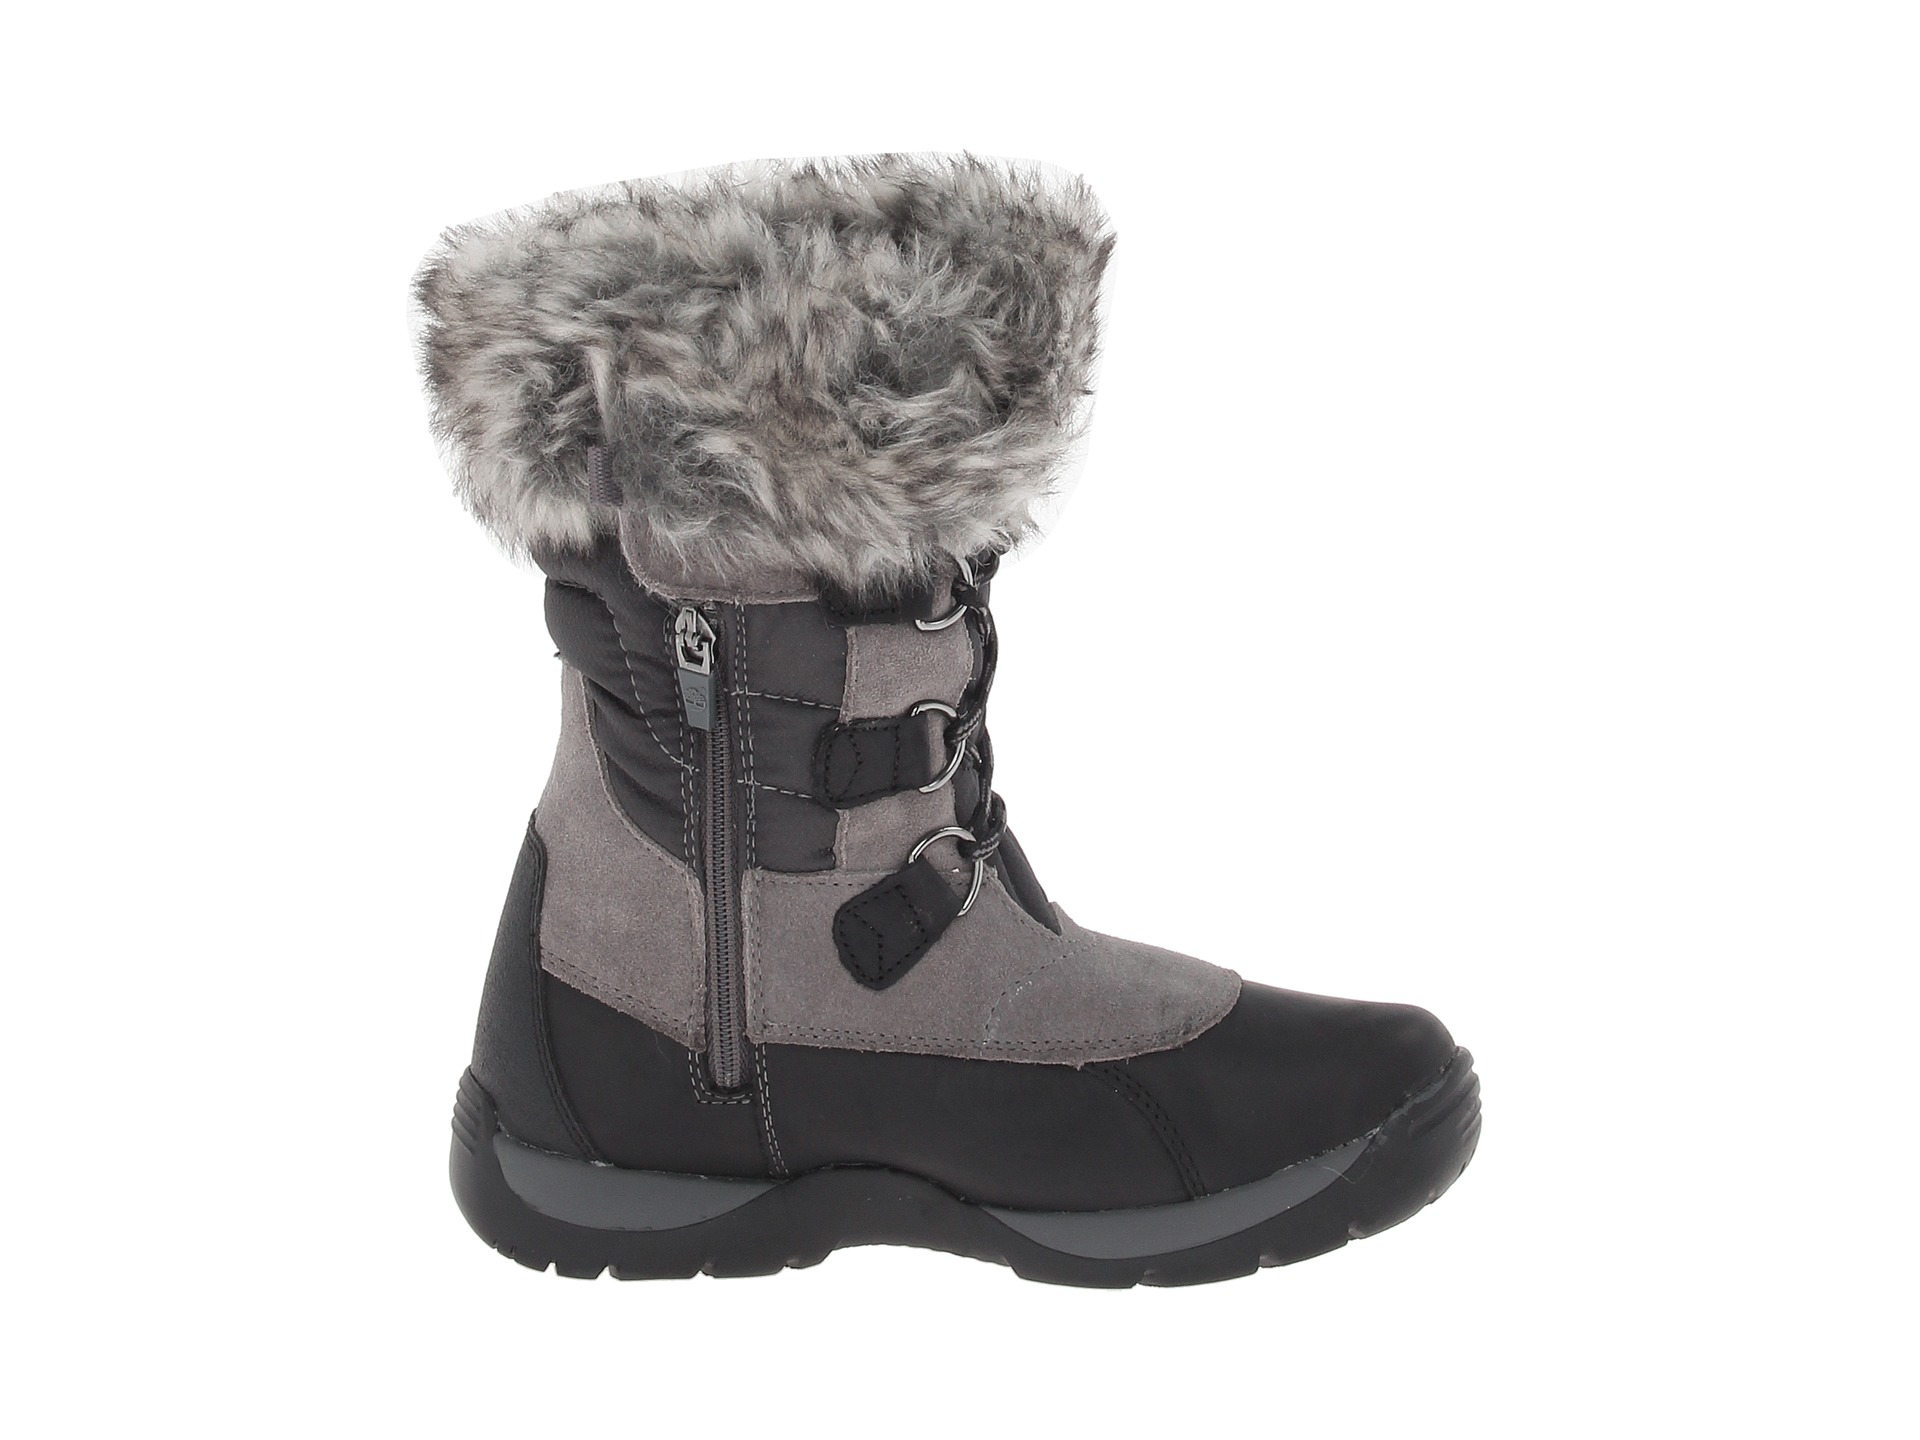 ... Bliss Girls Waterproof Snow Boot Little Kid | Shipped Free at Zappos